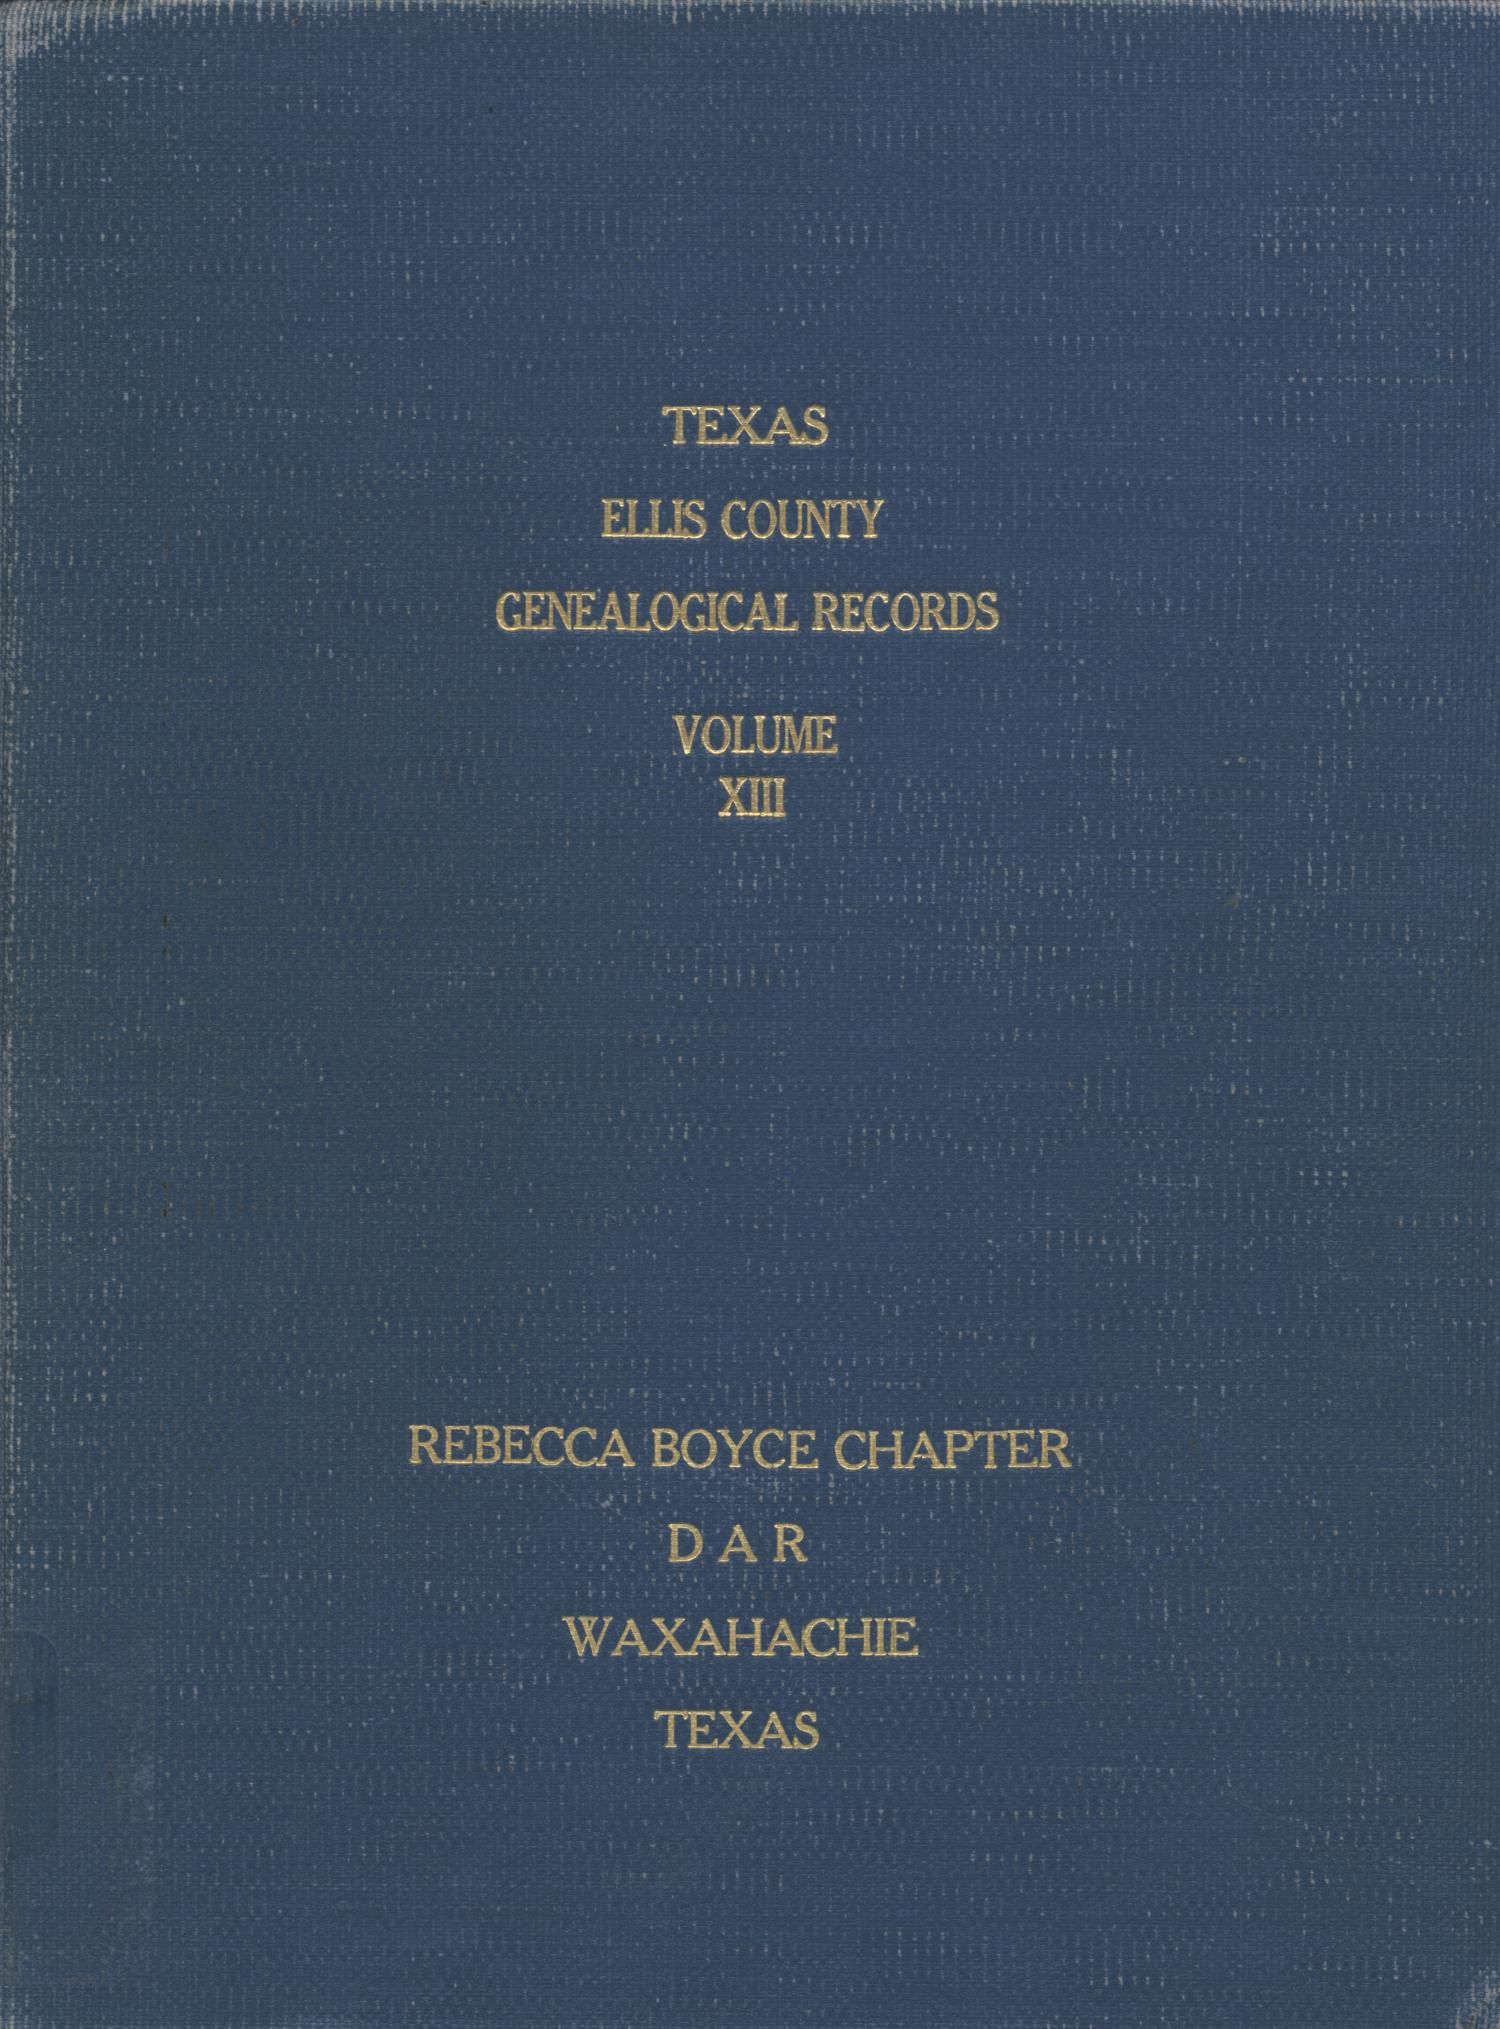 Texas Genealogical Records, Ellis County, Volume 13, 1700-1959
                                                
                                                    Front Cover
                                                